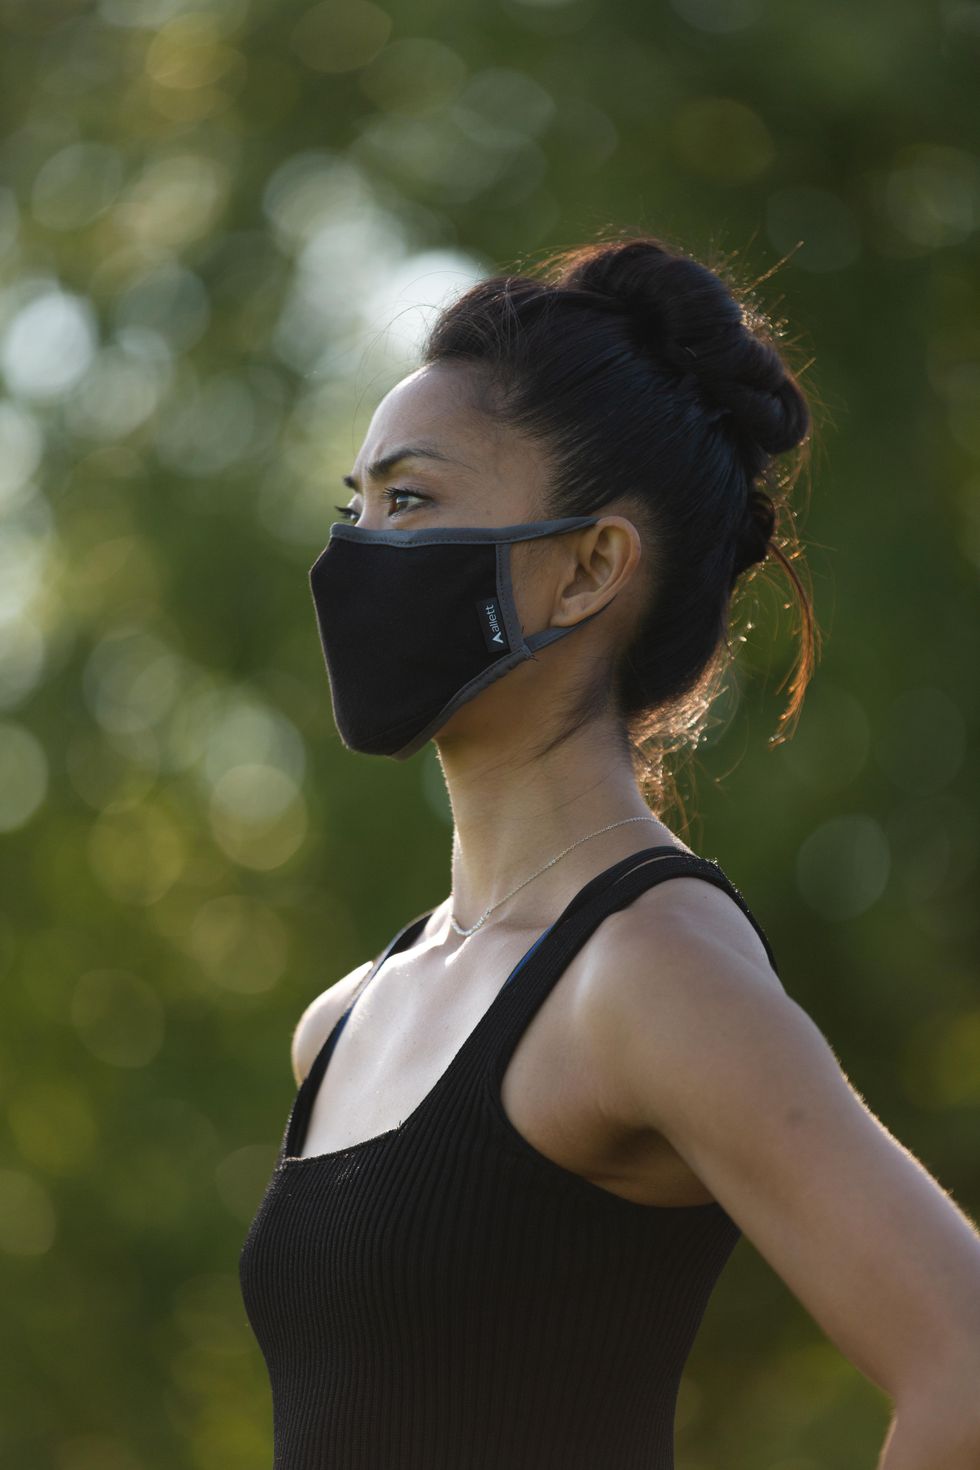 Stella Abrera stands tall in a black mask and black tank top, hair in a messy bun